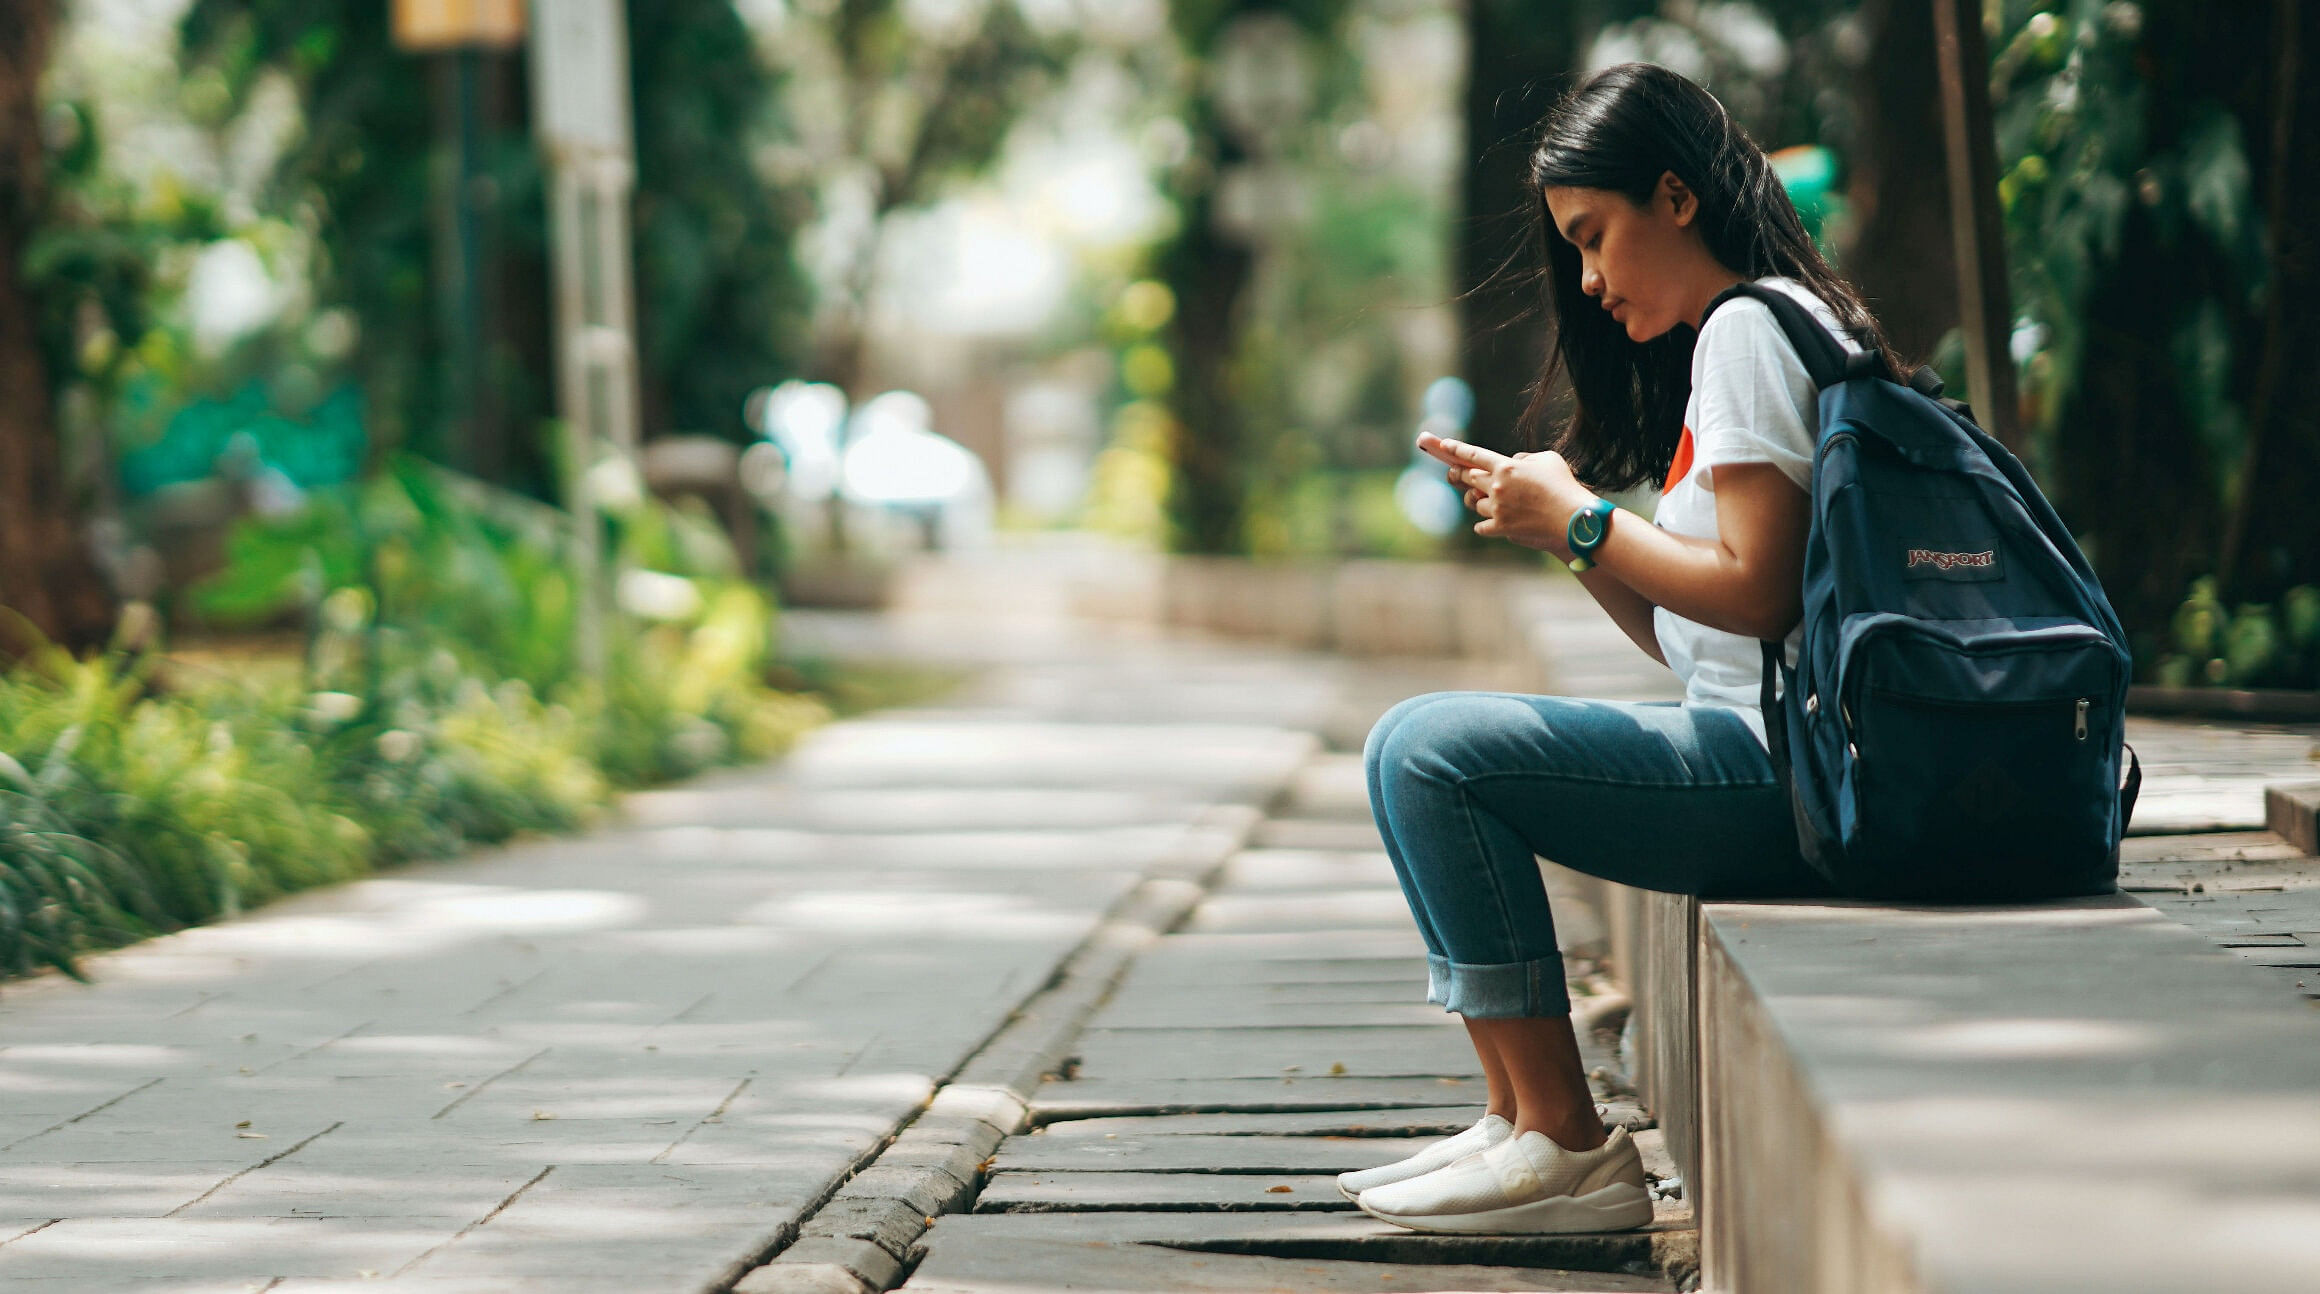 girl sitting on a sidewalk and using her smartphone